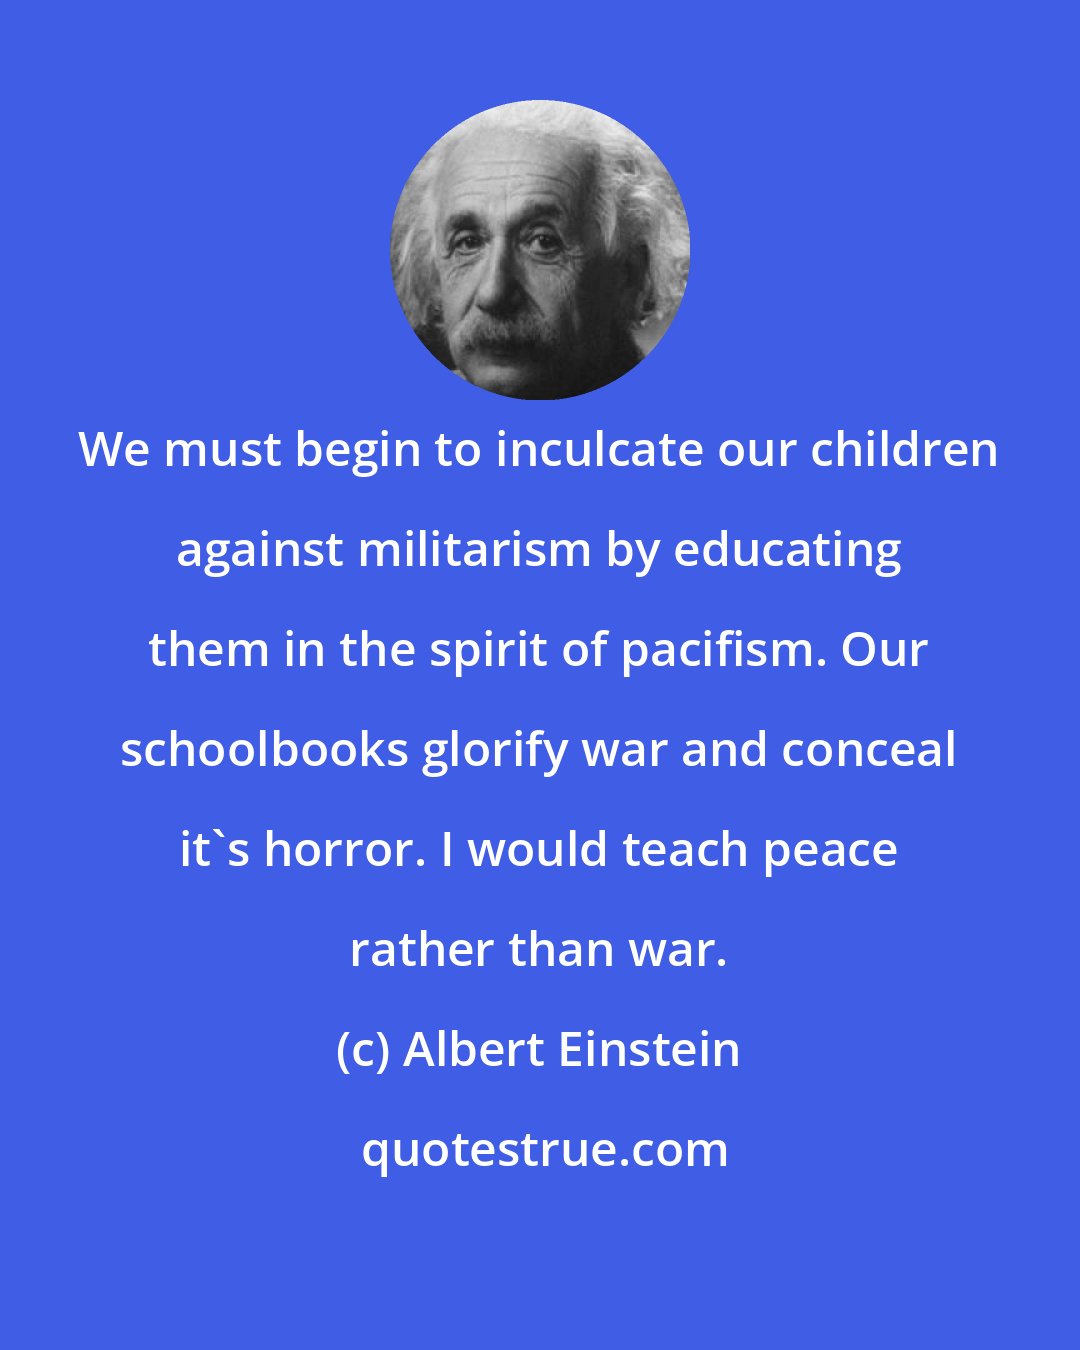 Albert Einstein: We must begin to inculcate our children against militarism by educating them in the spirit of pacifism. Our schoolbooks glorify war and conceal it's horror. I would teach peace rather than war.